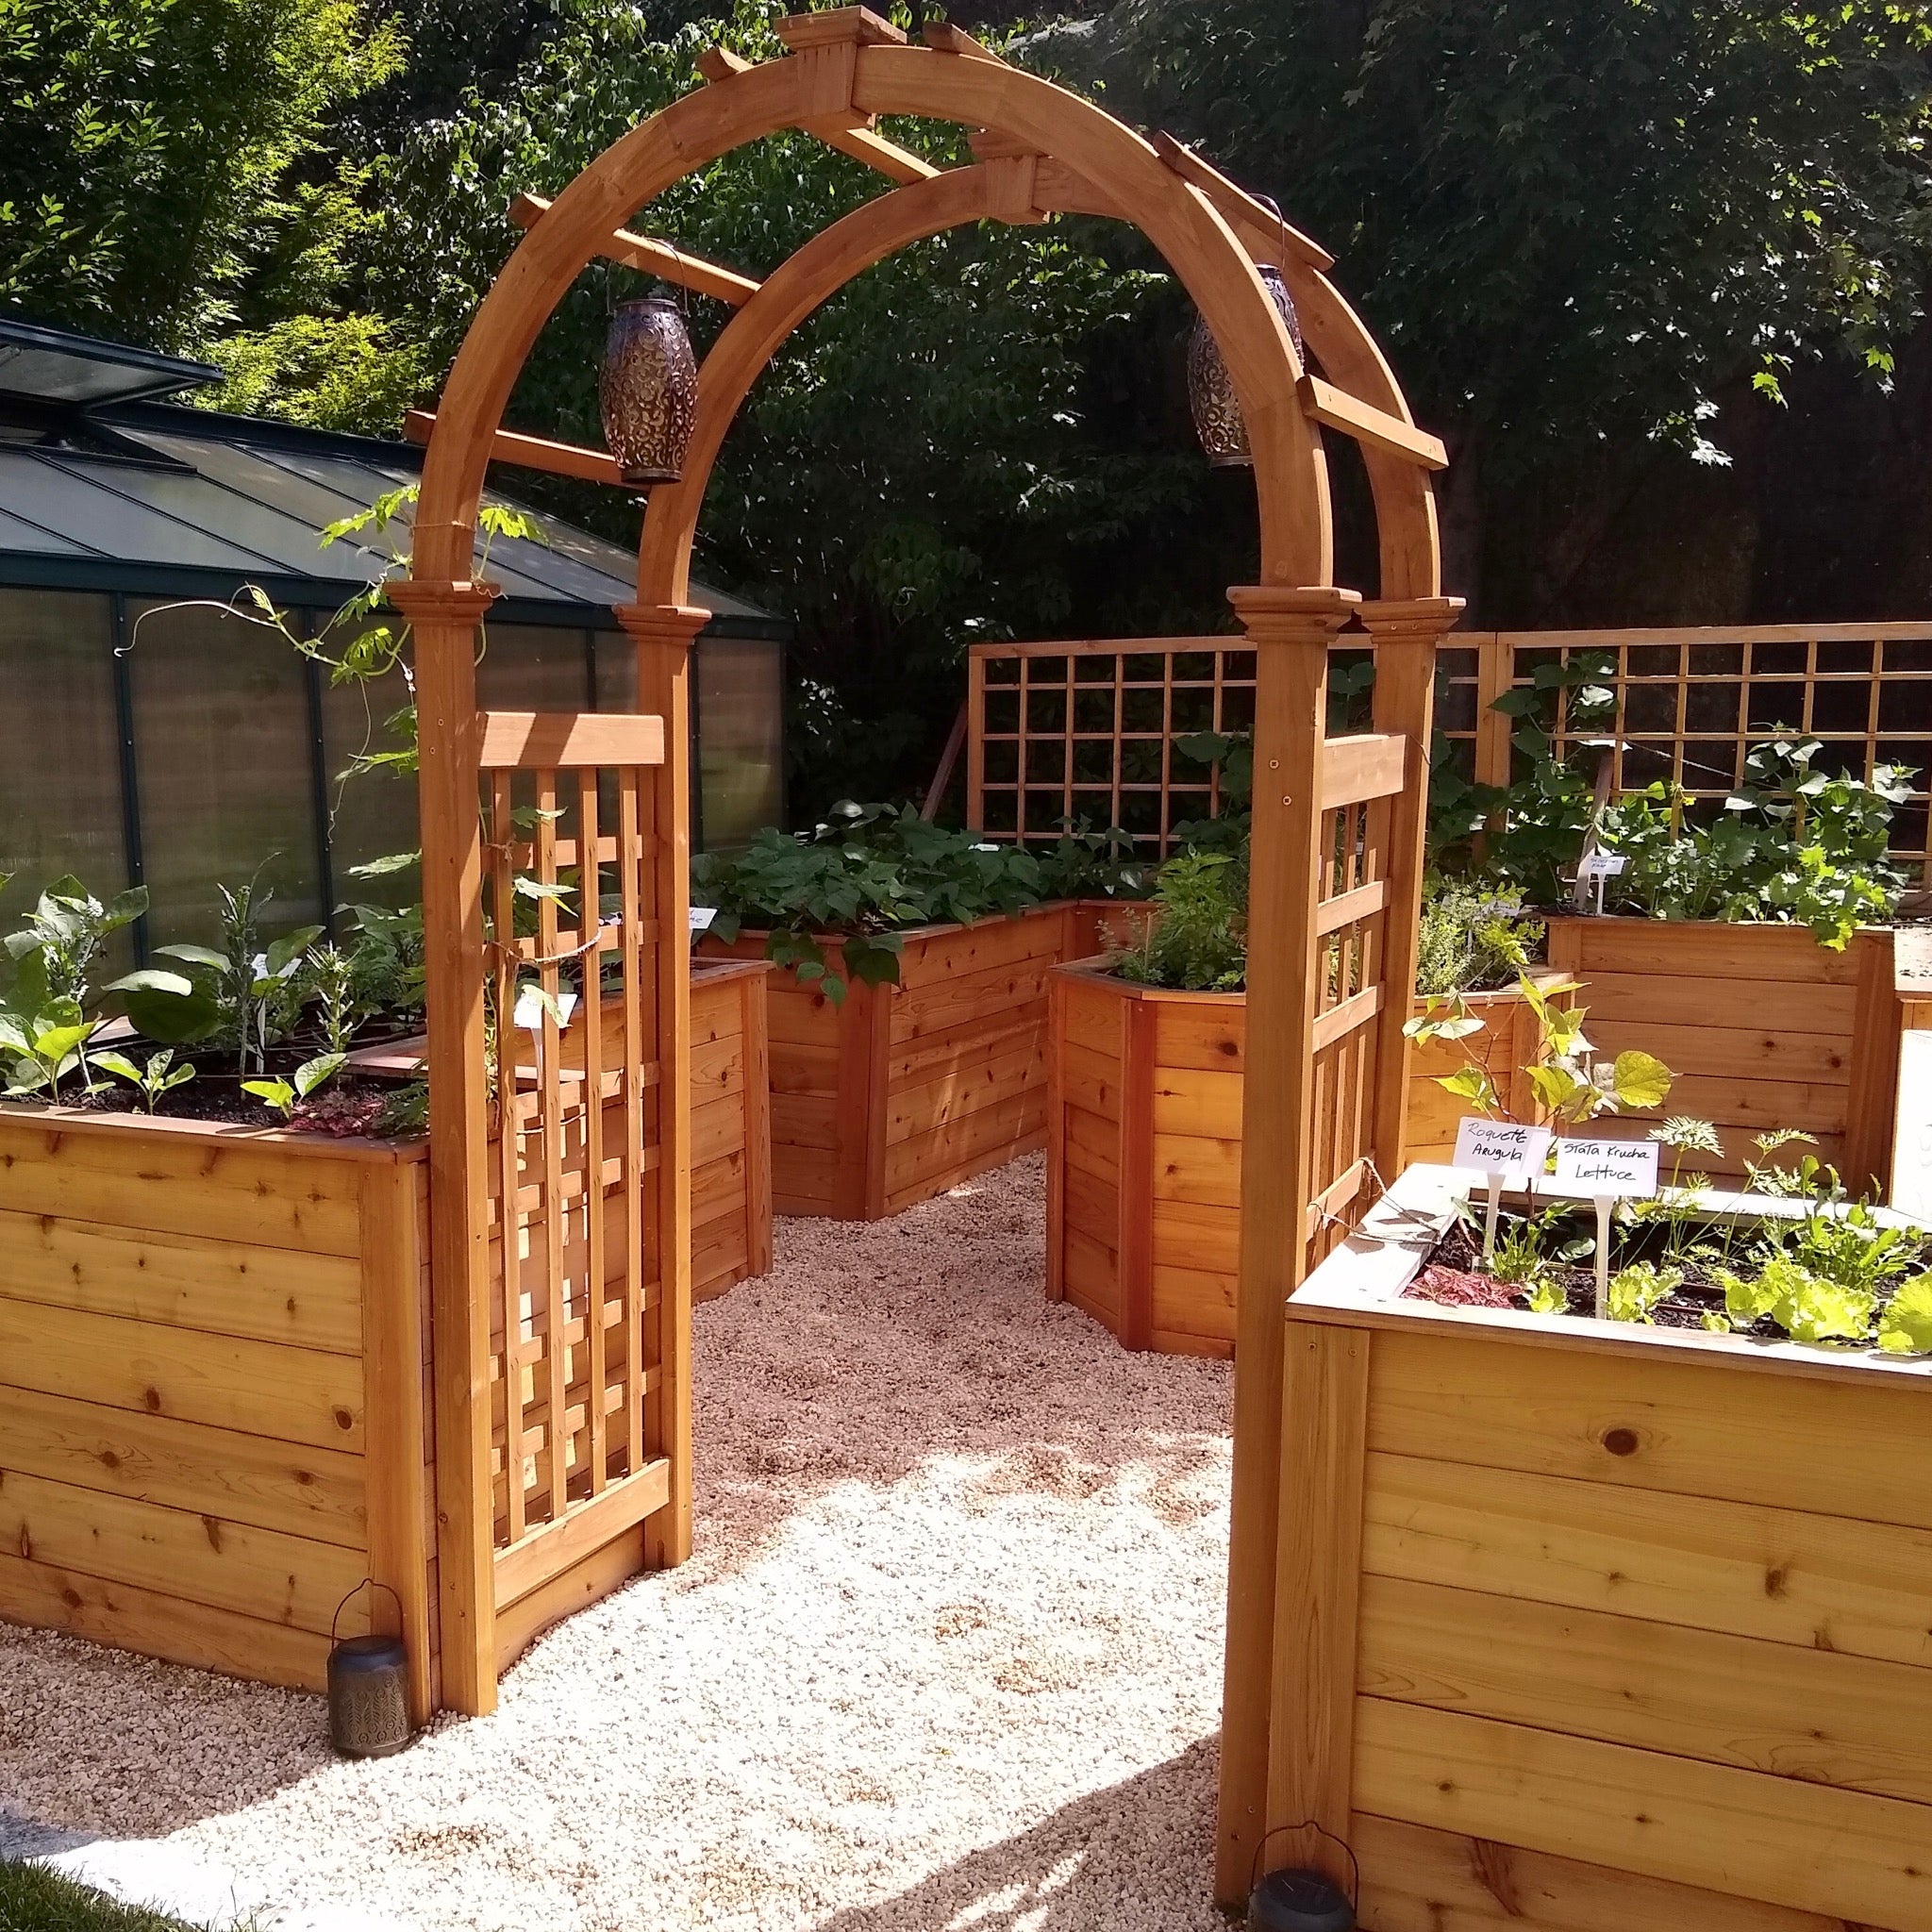 Garden Beds - Designs and Builds